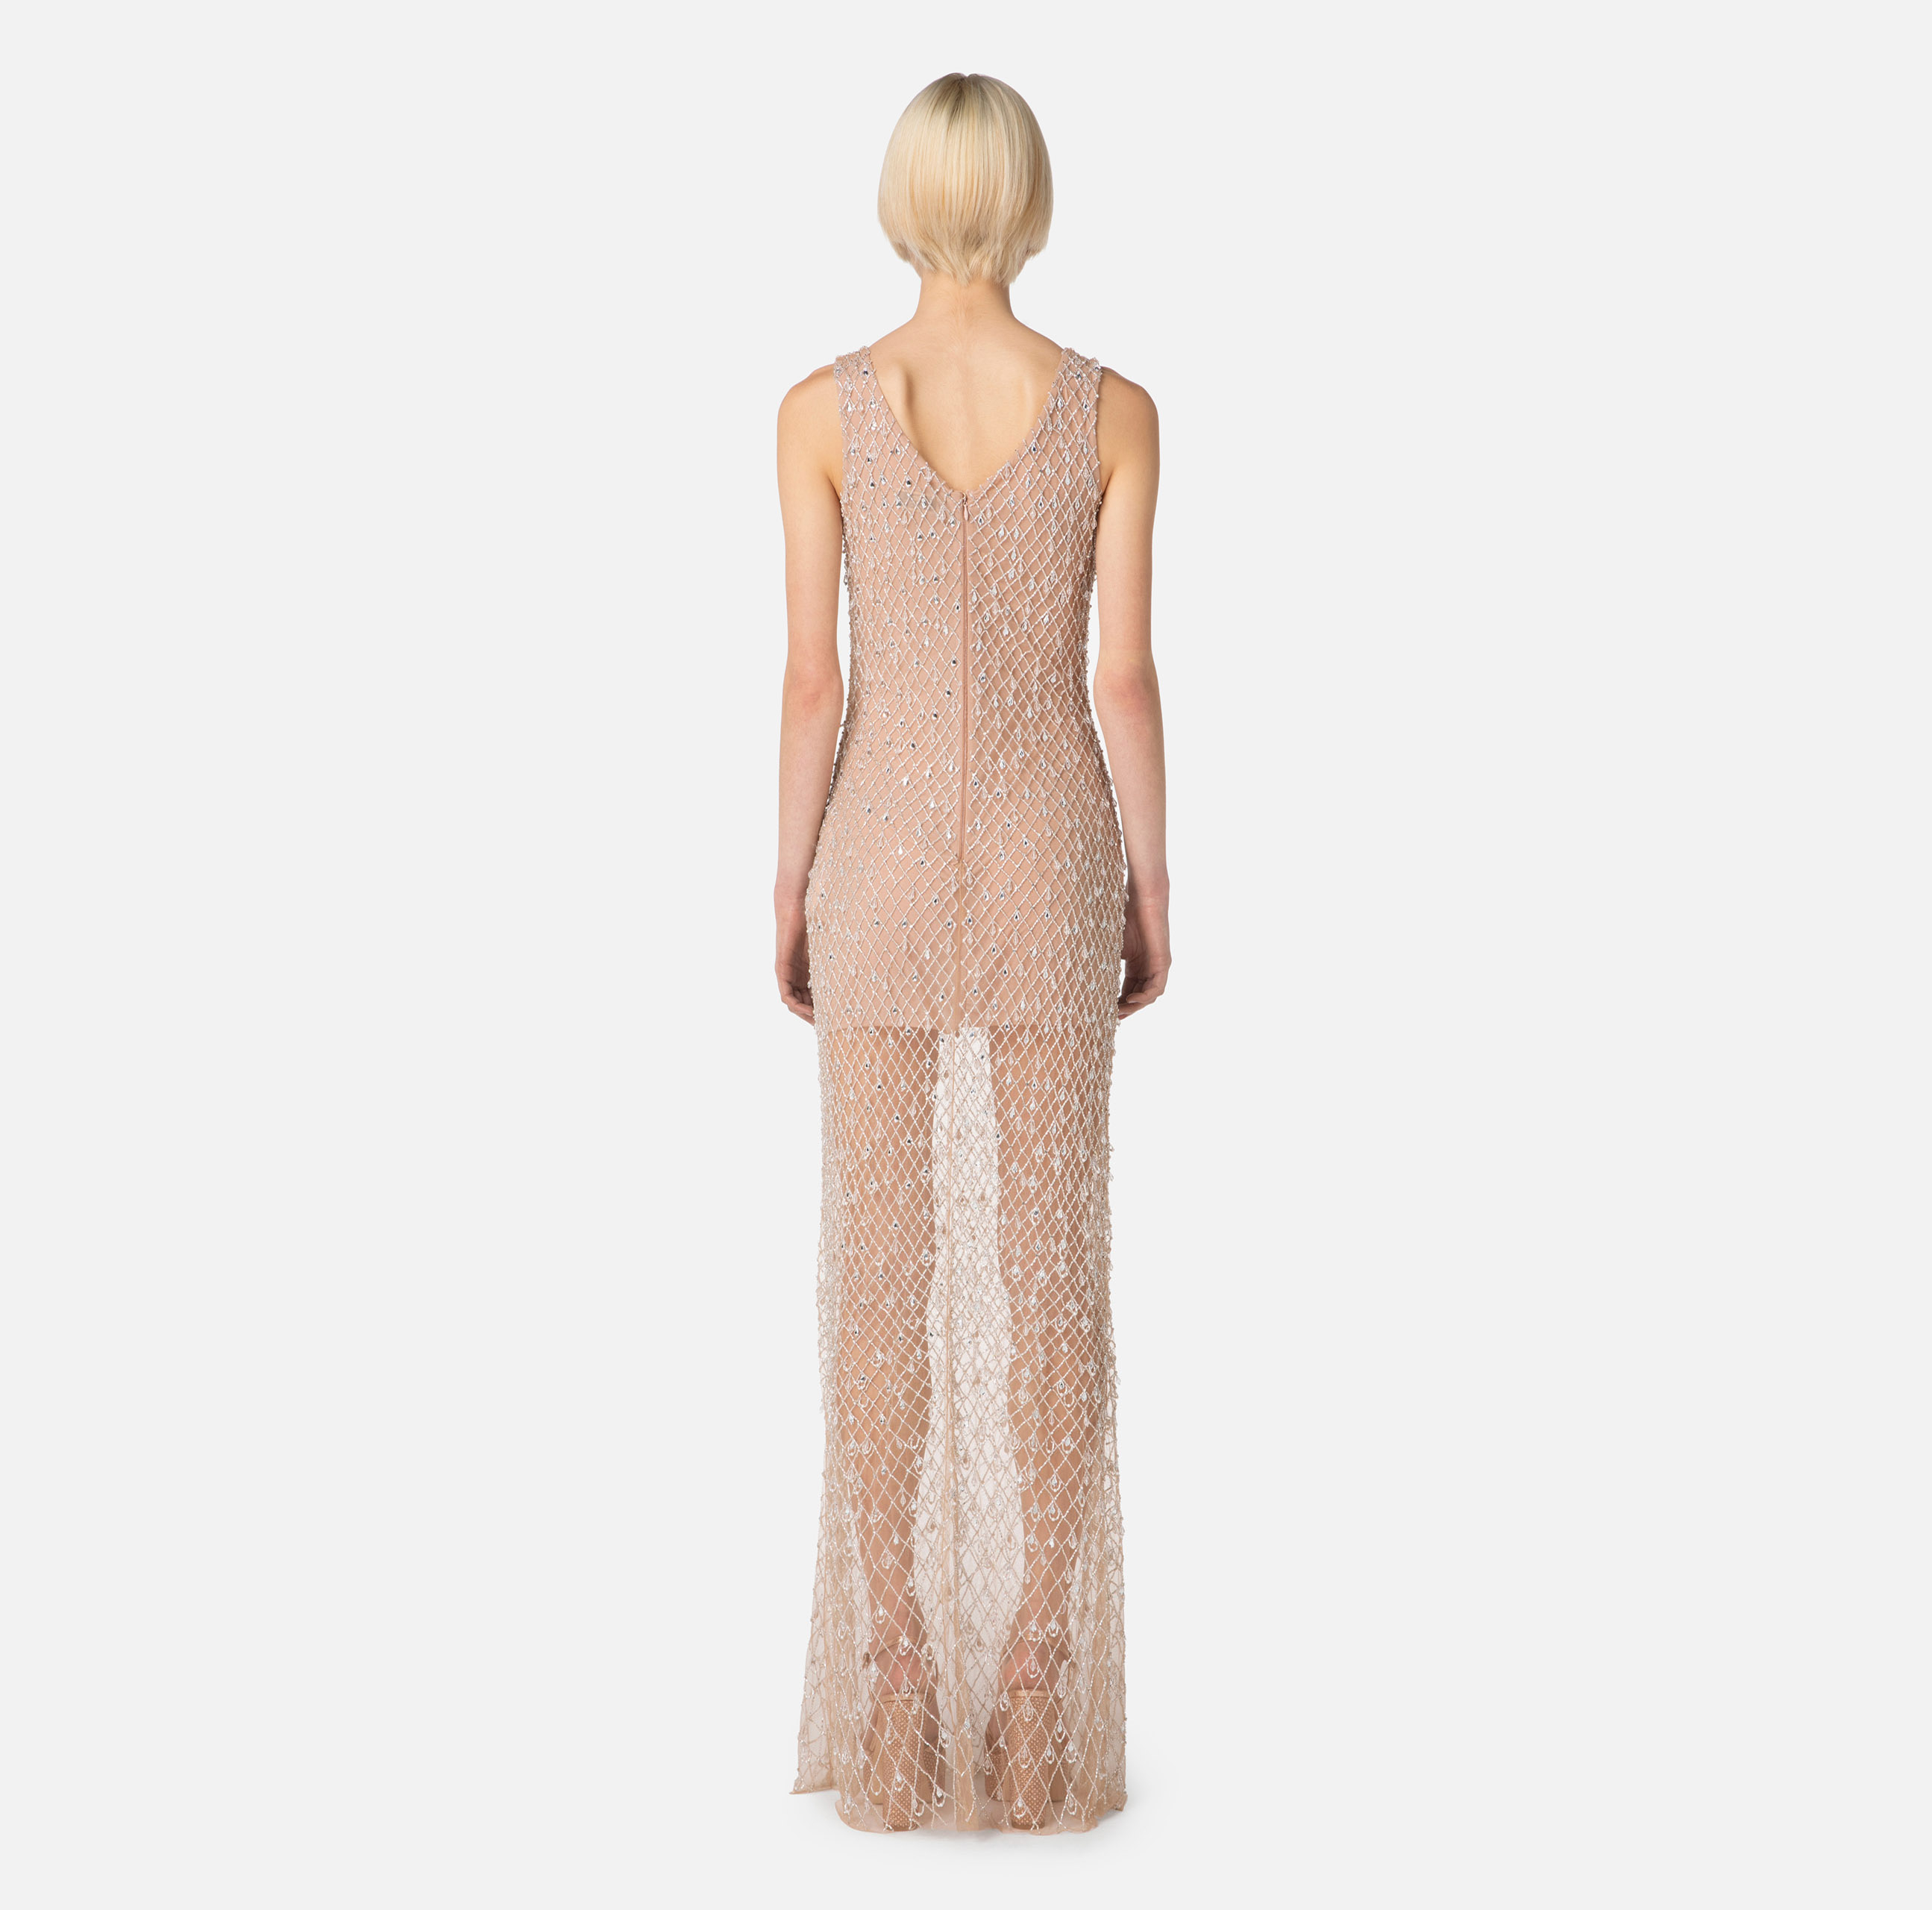 Tulle Red Carpet dress with diamond embroidery - Elisabetta Franchi